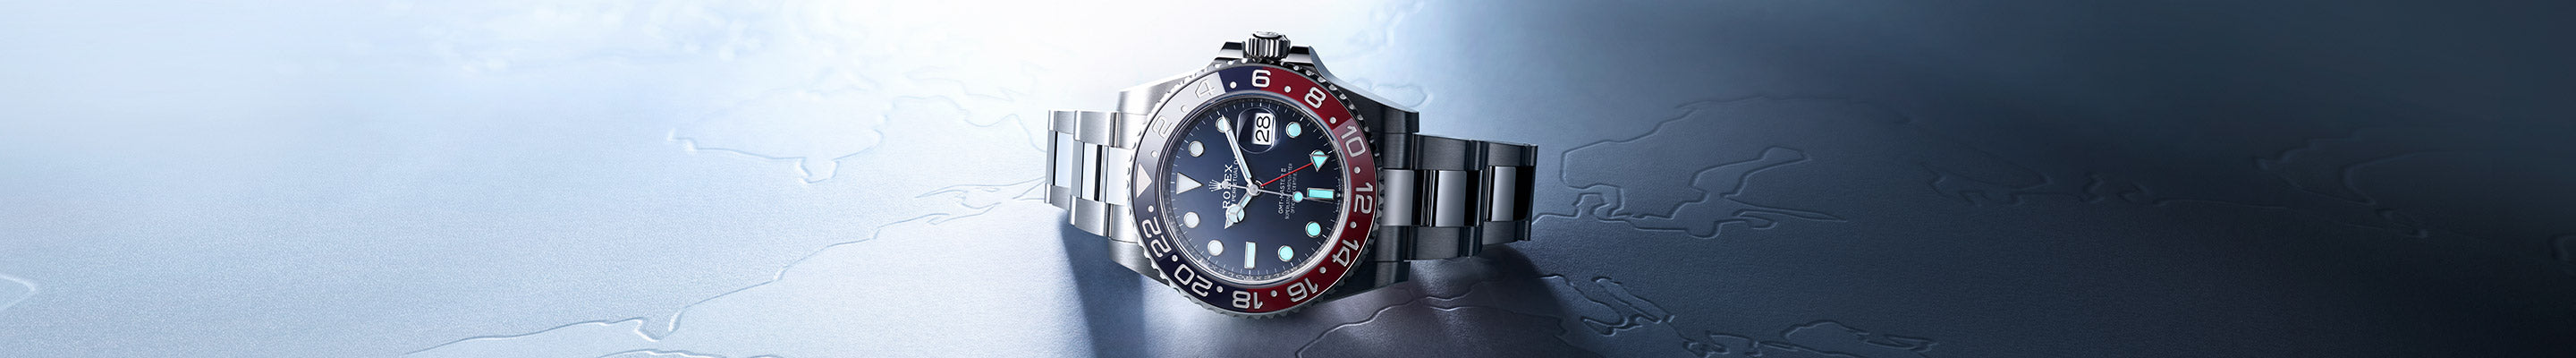 Rolex Oyster Perpetual GMT-Master II on Textured Table at Fink's Jewelers